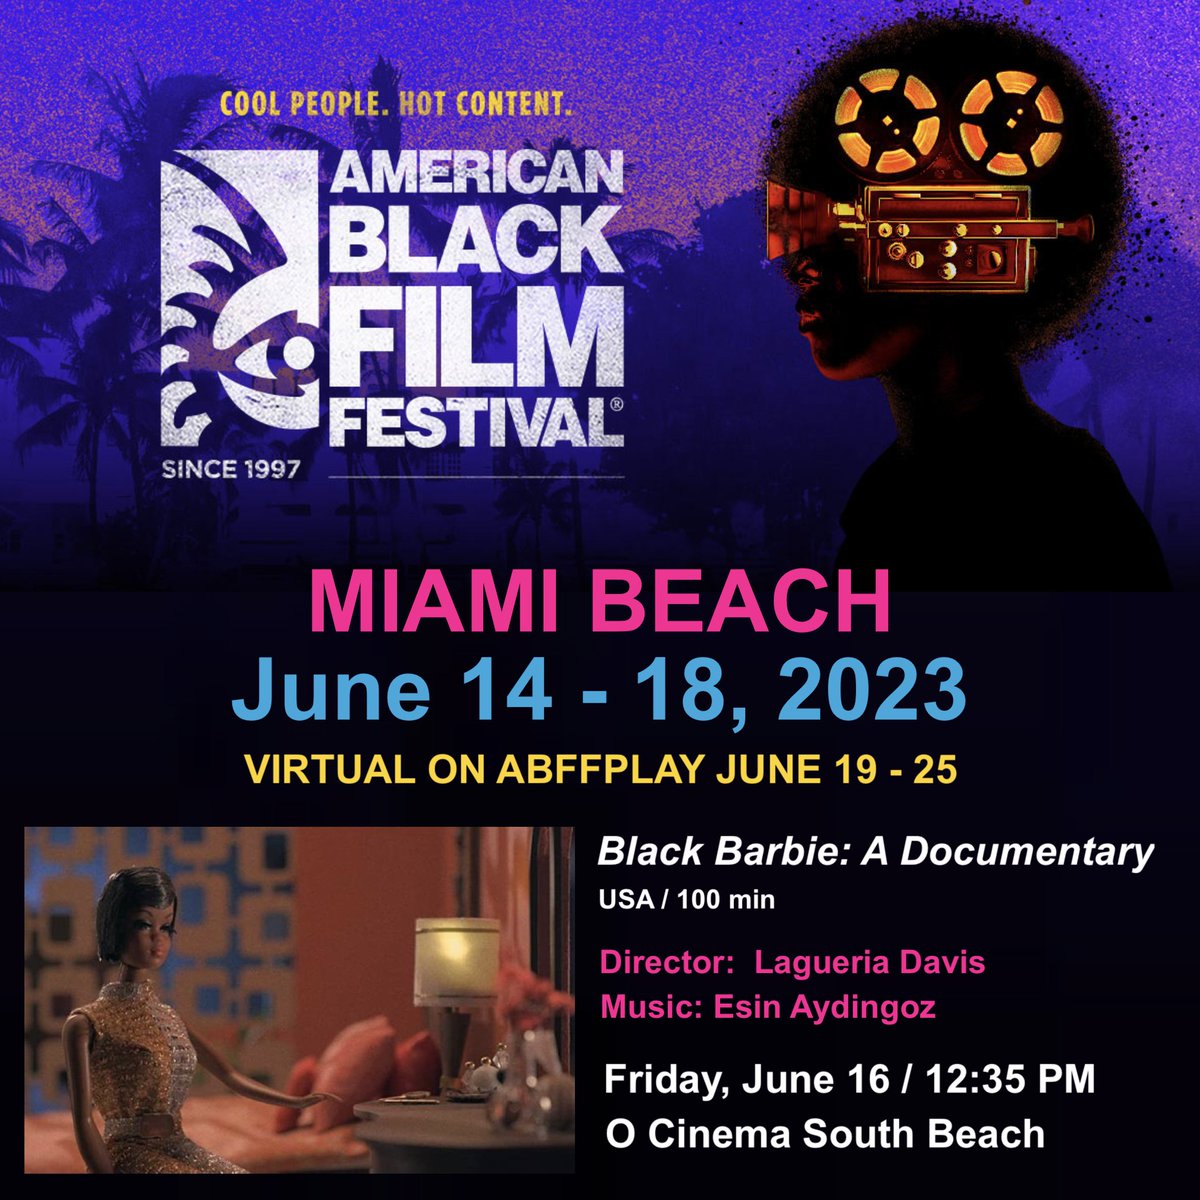 More great news in regards to the critically acclaimed doc, BLACK BARBIE A DOCUMENTARY scored by our own, @esinaydingoz will be shown this weekend at the @ABFF! #blackbarbie #composer #esinaydingoz #filmcomposer #femalecomposer
*
Tickets/More Info: abff.com